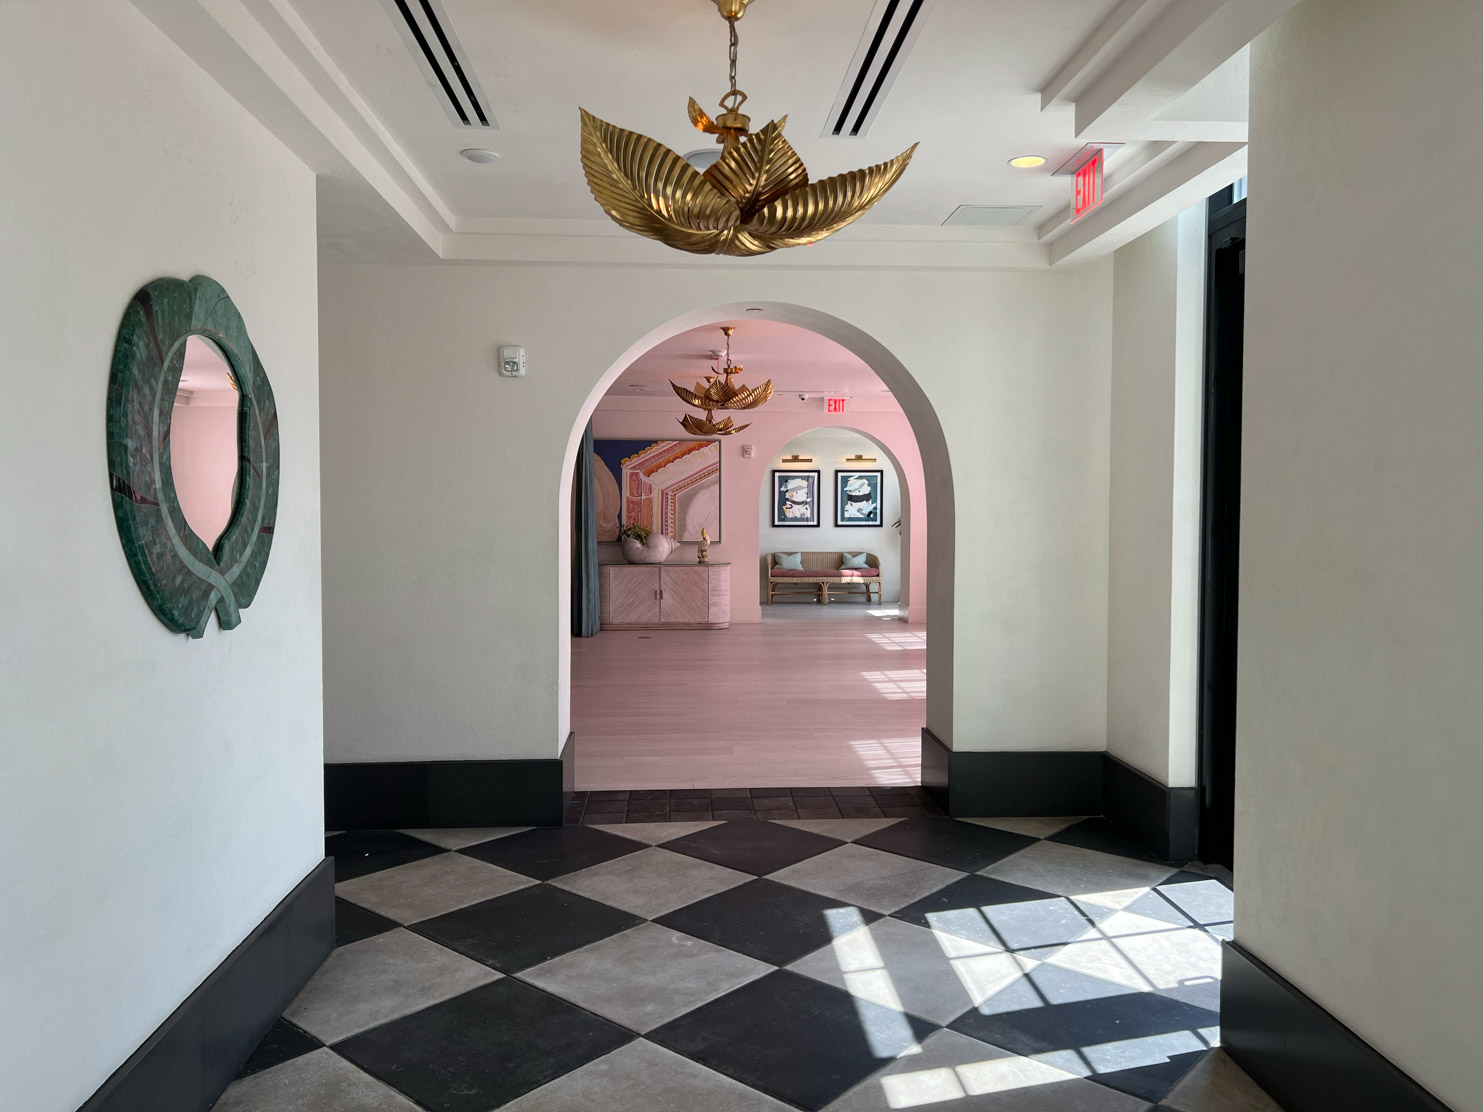 The Goodtime Hotel And the Art Deco interiors by Ken Fulk